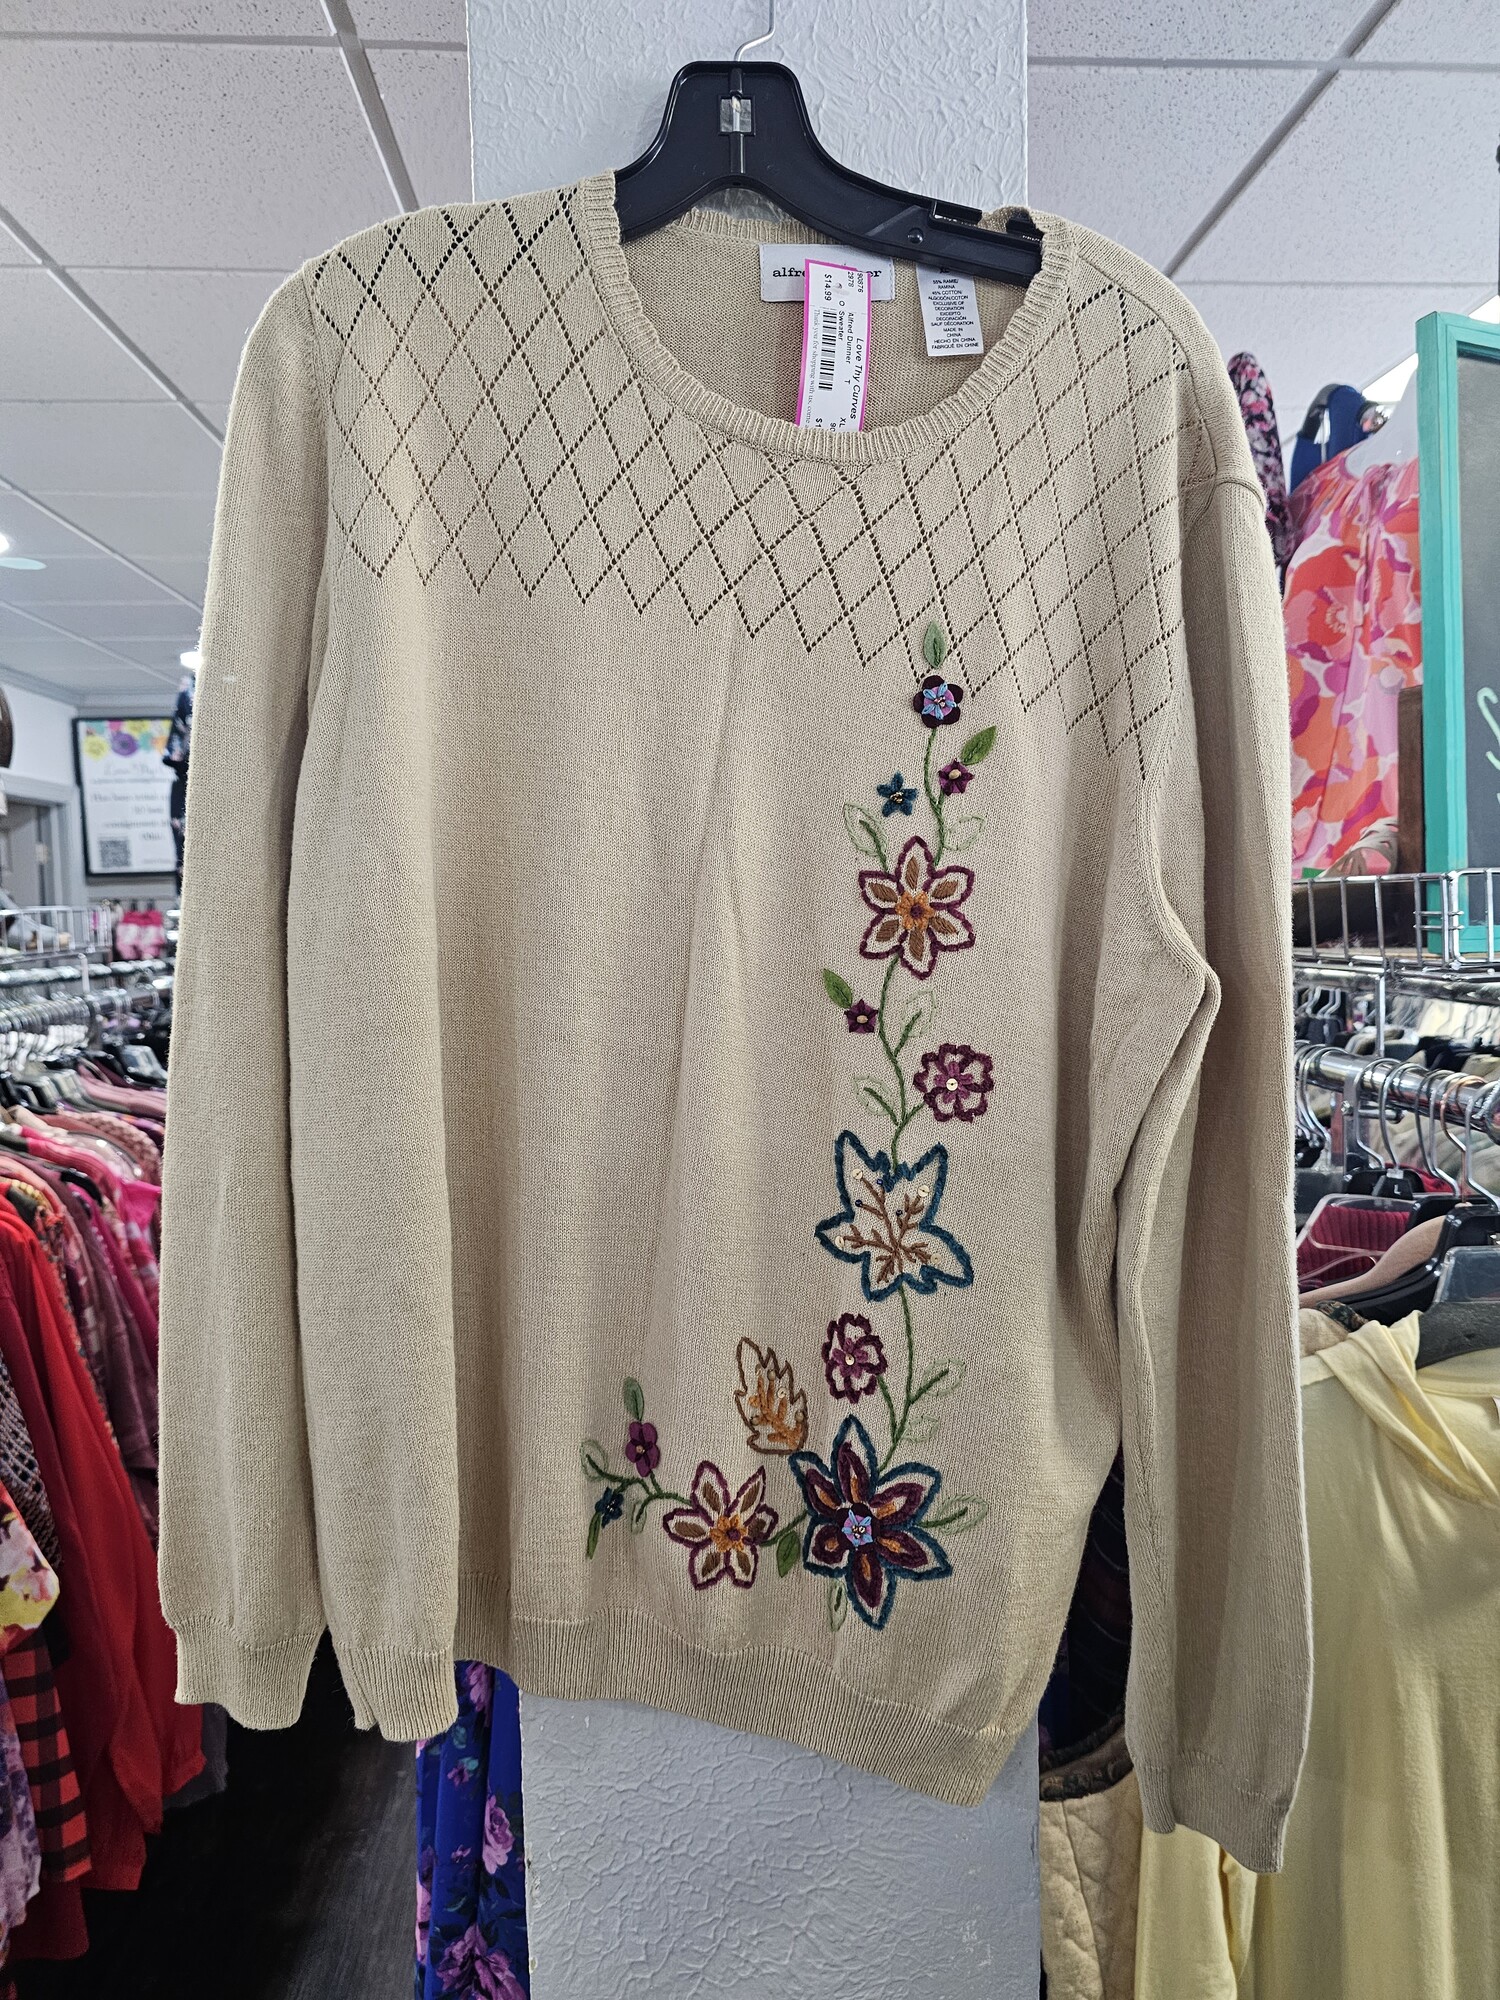 Cute sweater in a soft tan color with cute fall floral design embroidered on the front.